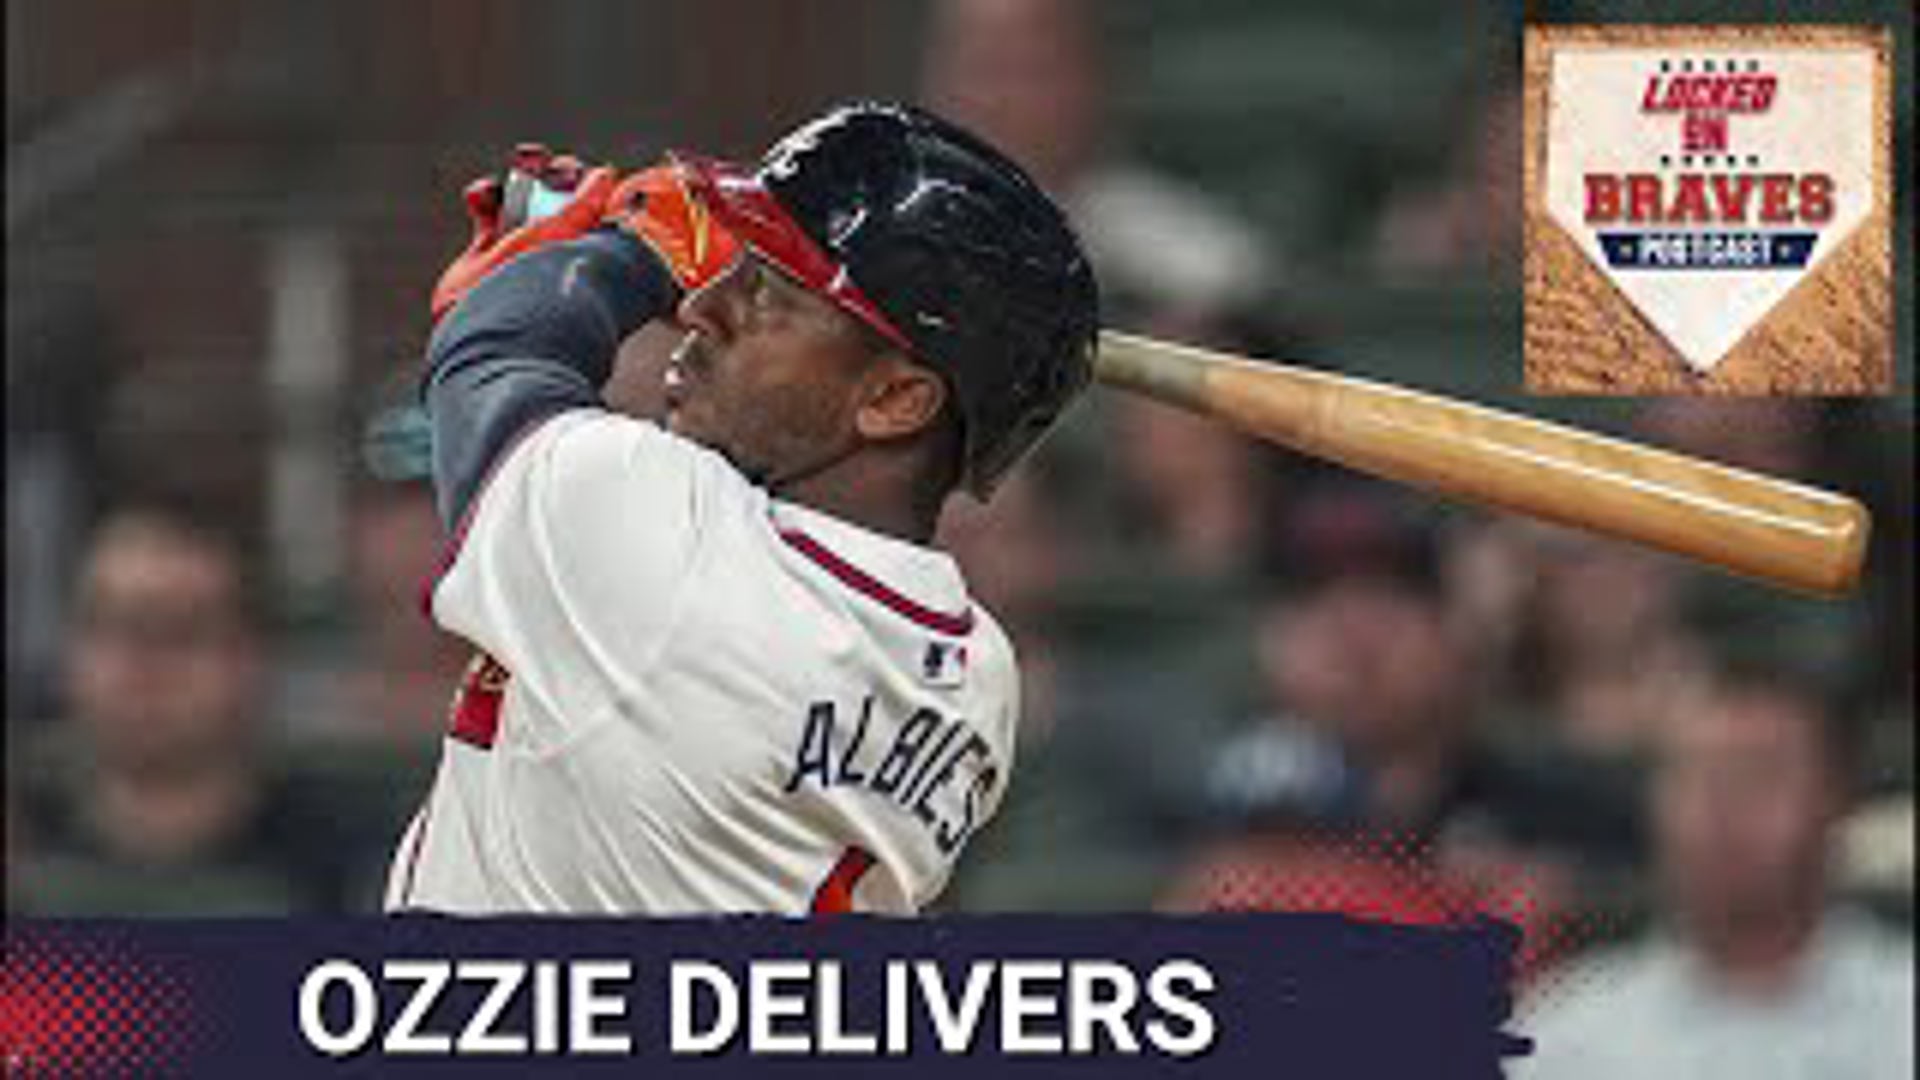 The bats got started late, but the Atlanta Braves lineup once again found the runs they needed to claim a 2-1 victory over the Detroit Tigers on Monday at Truist.